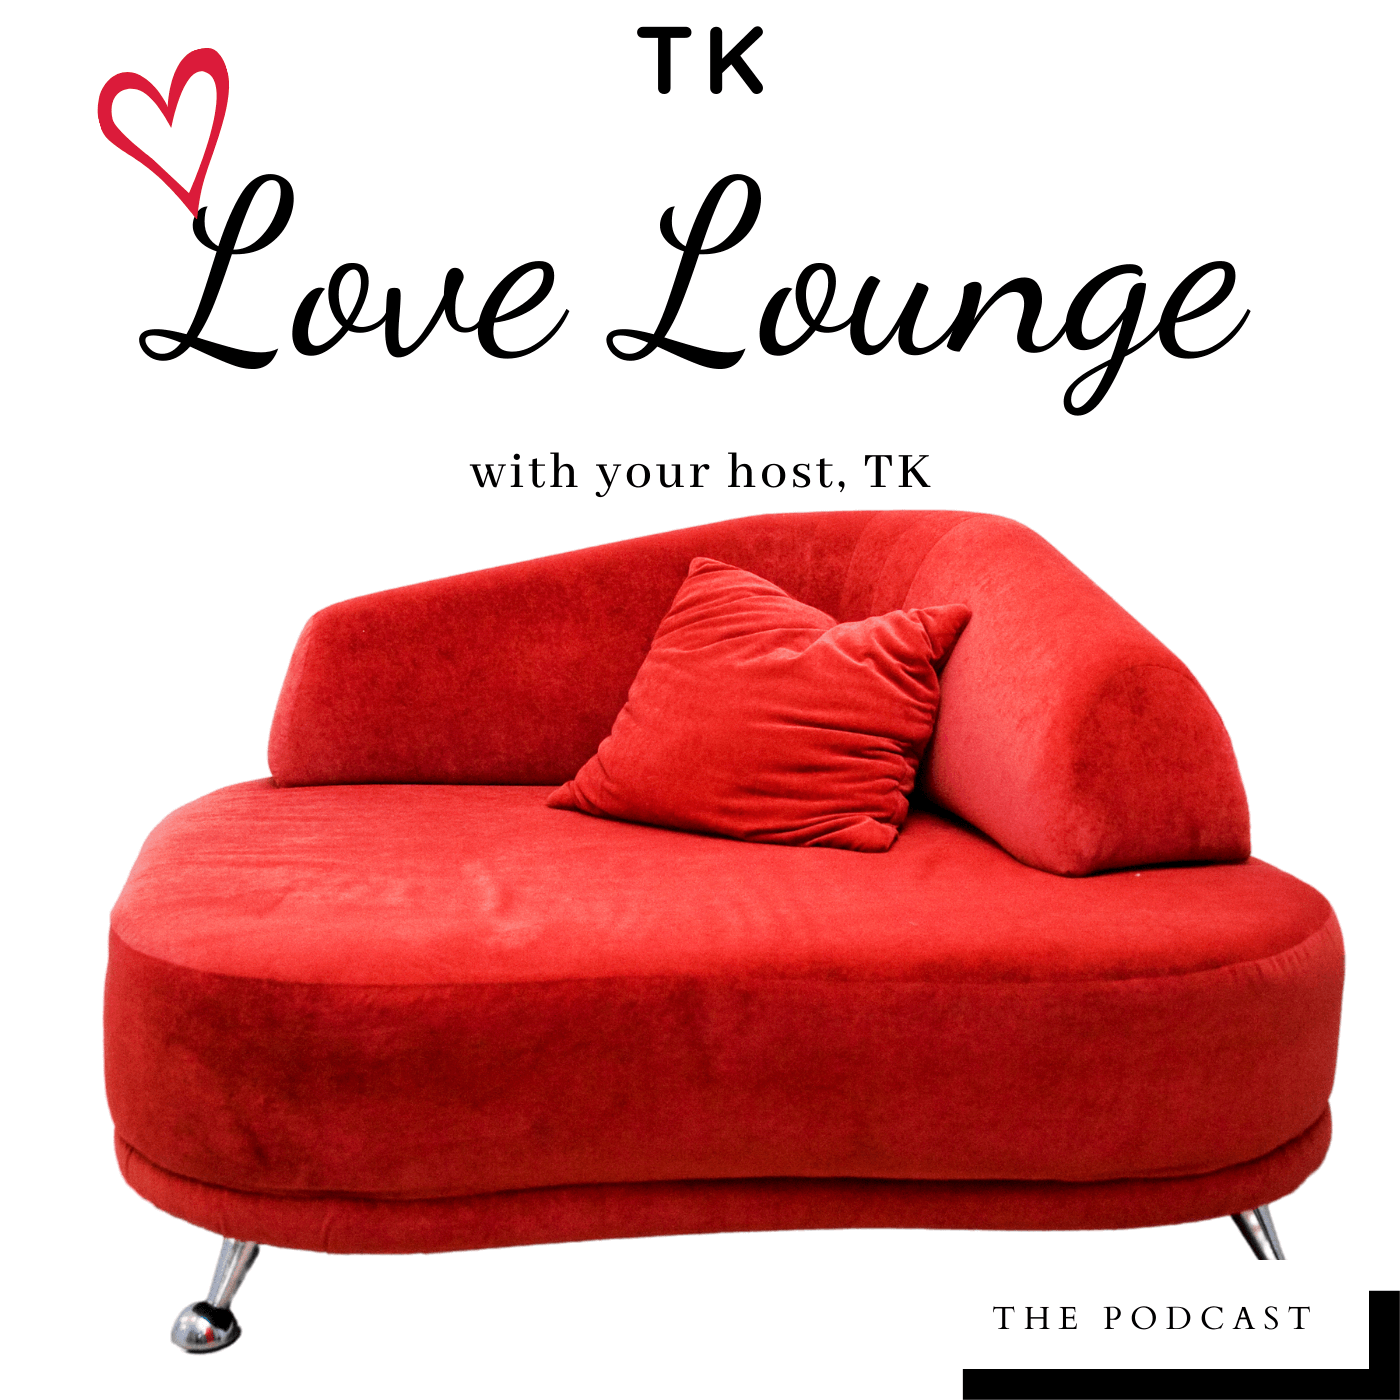 The TK Love Lounge’s Podcast